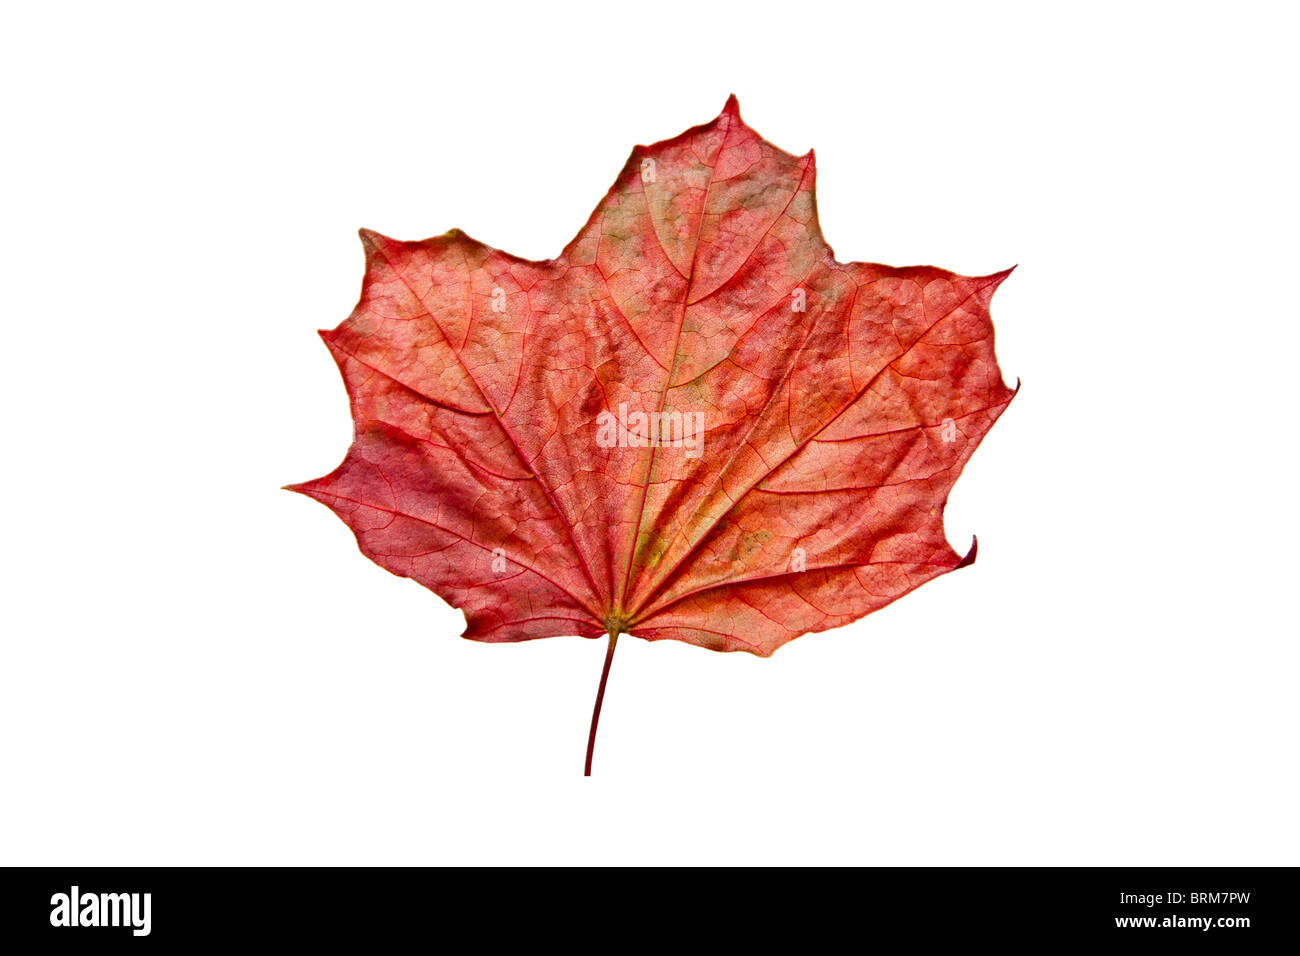 Bronze autumn Sycamore leaf (Acer pseudoplatanus) on a white background Stock Photo